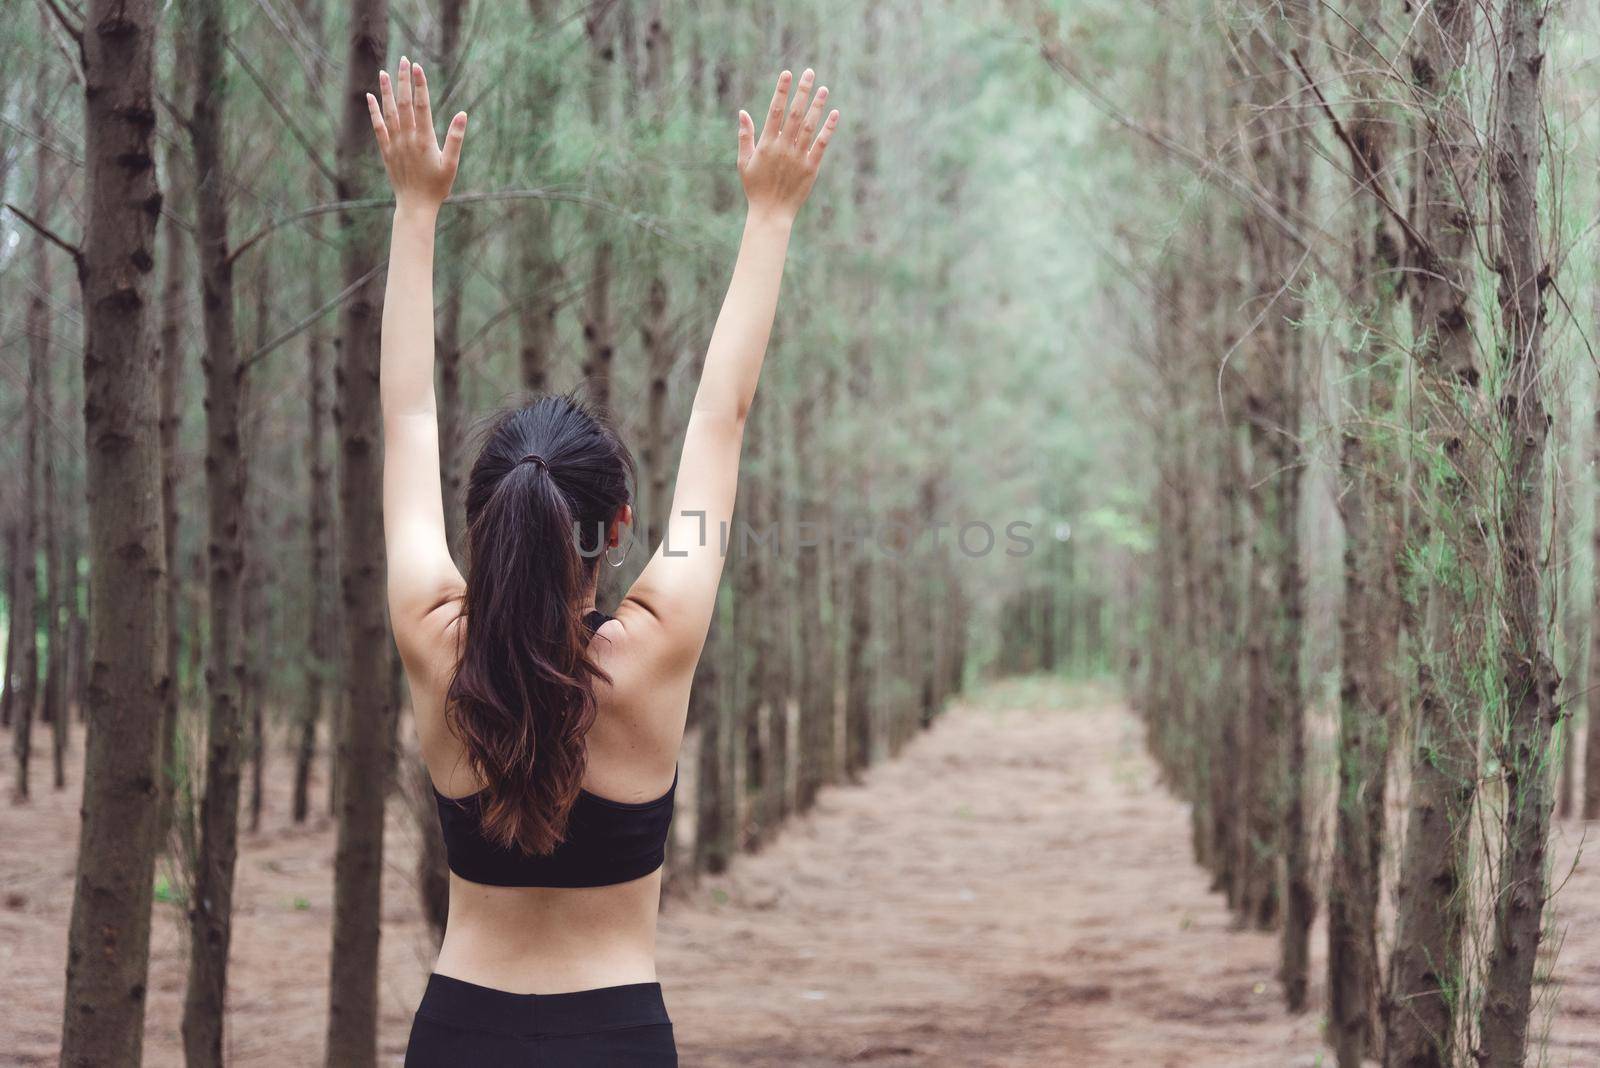 Women breathe fresh air in middle of pinewood forest while exercising. Workouts and Lifestyles concept. Happy life and Healthcare theme. Nature and Outdoors theme. Back view